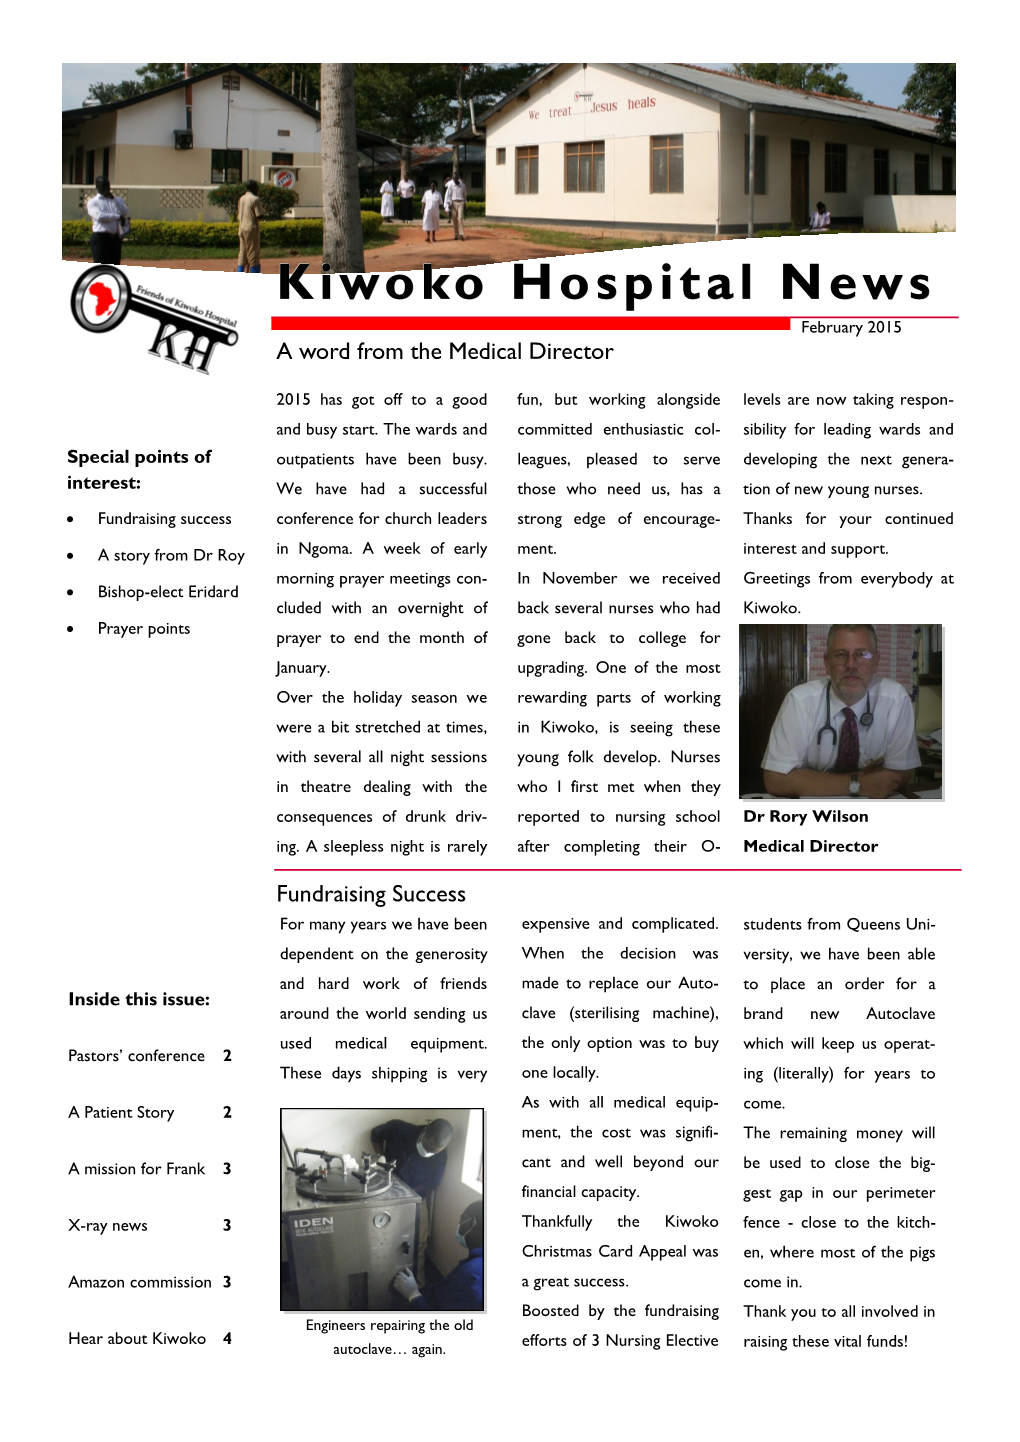 Kiwoko Hospital News February 2015 a Word from the Medical Director